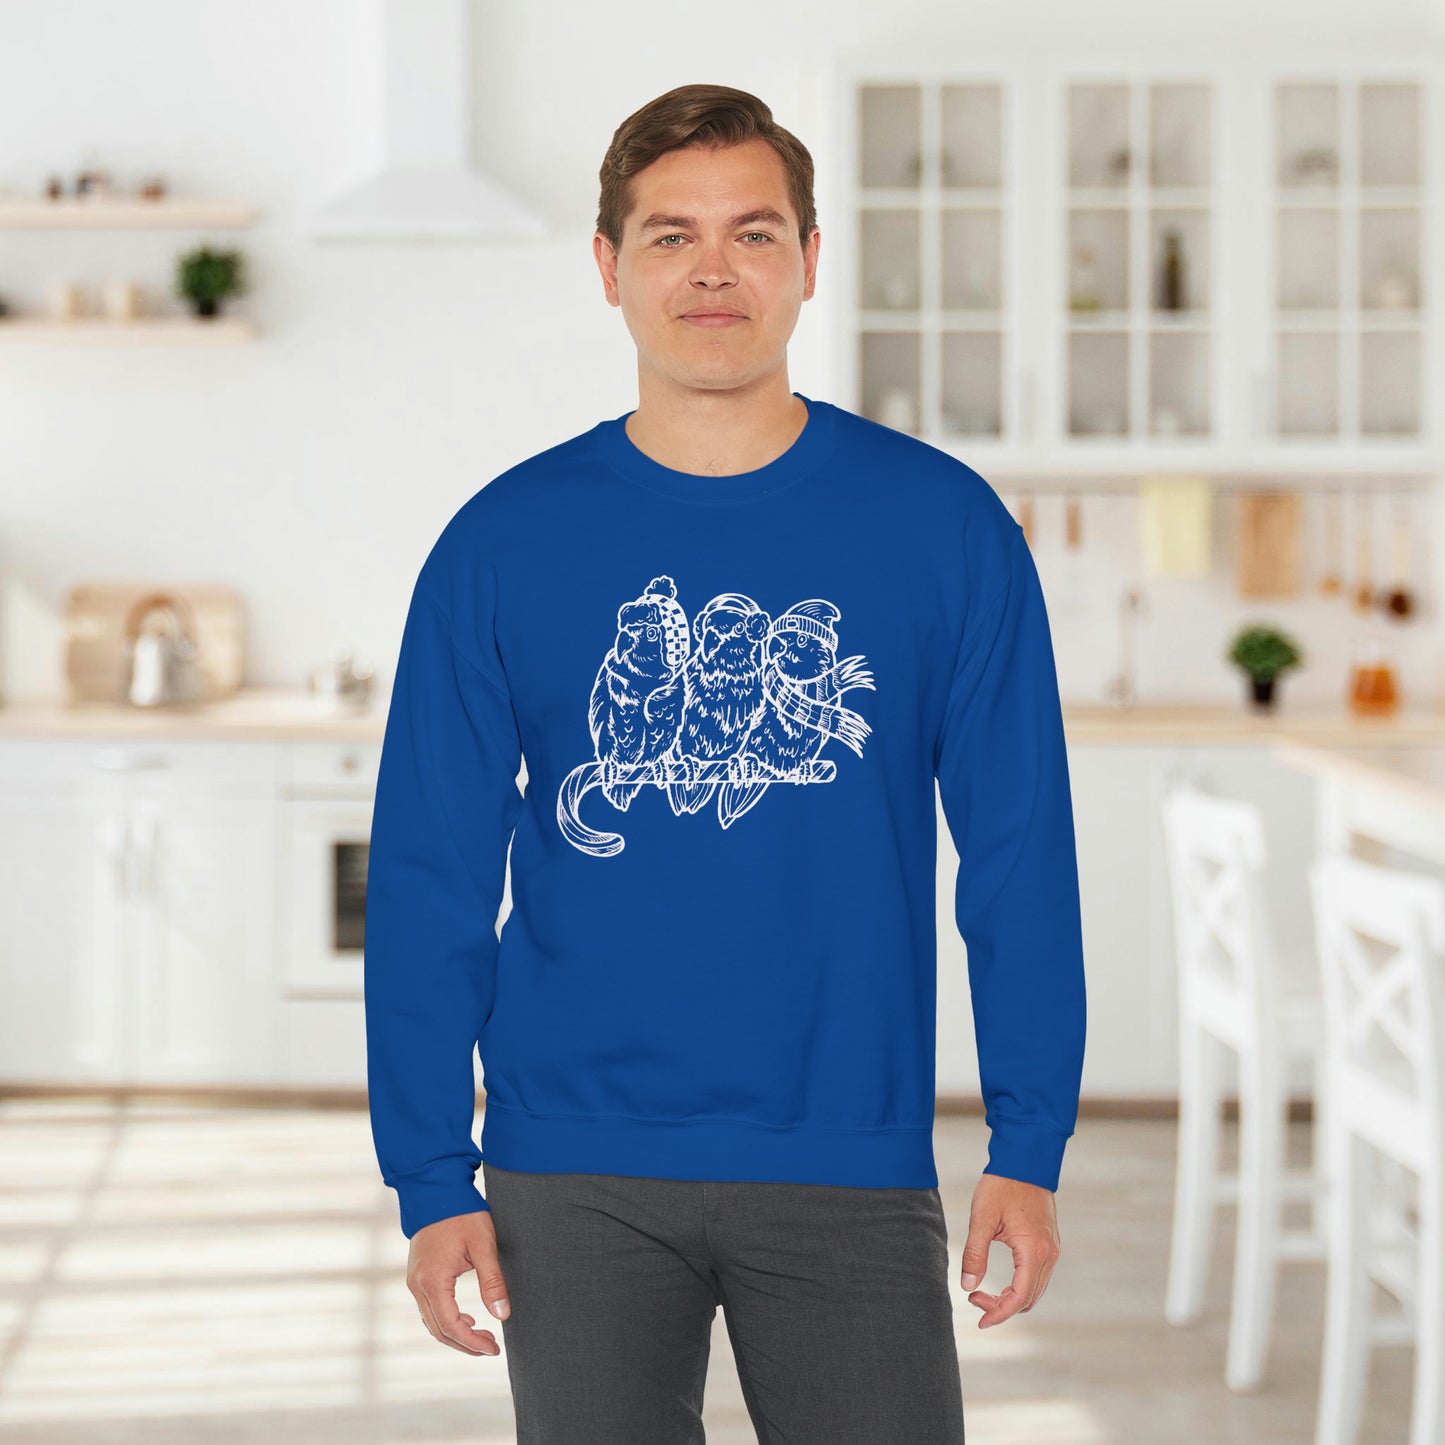 3 Lovebirds with Winter Wear & Perched on a Candy Cane, Line Art Crew Neck Sweatshirt